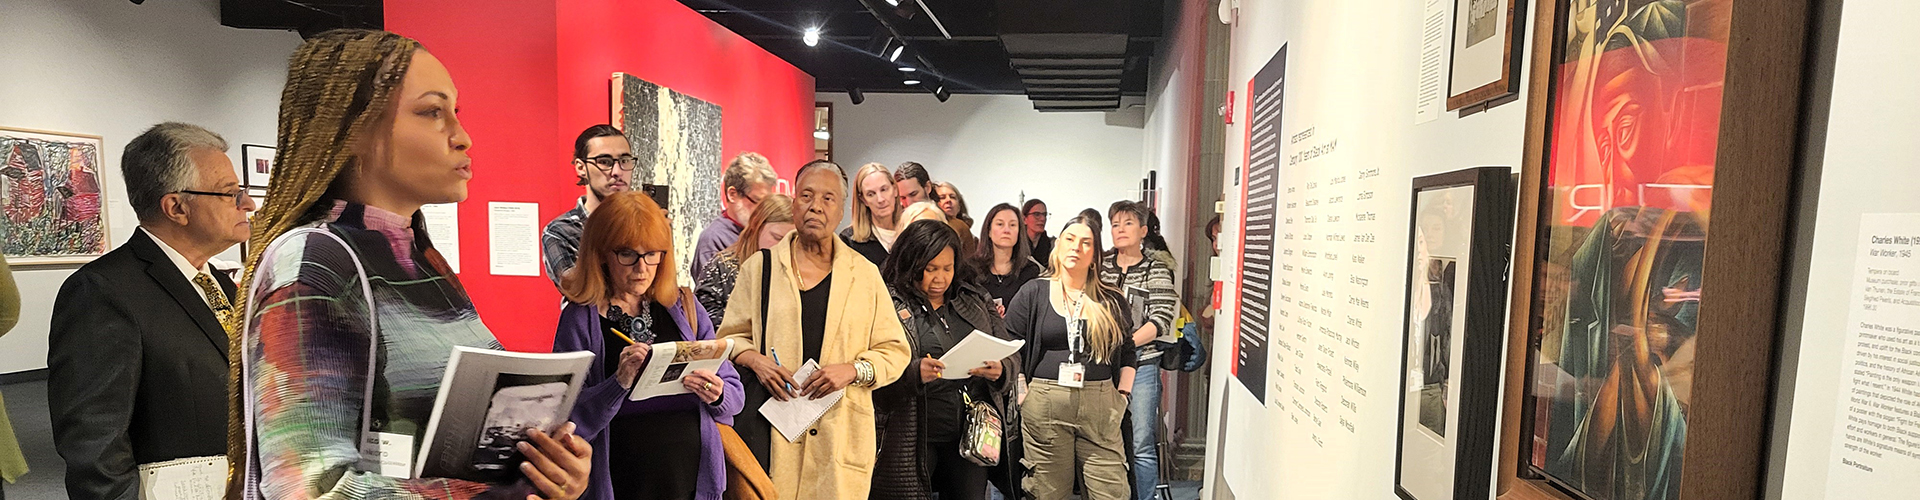 Group of MAM docents on a tour of the exhibition "Century: 100 Years of Black Art at MAM" One of the exhibition's co-curators, nico w. okoro is in the foregraound of the image leading the tour.